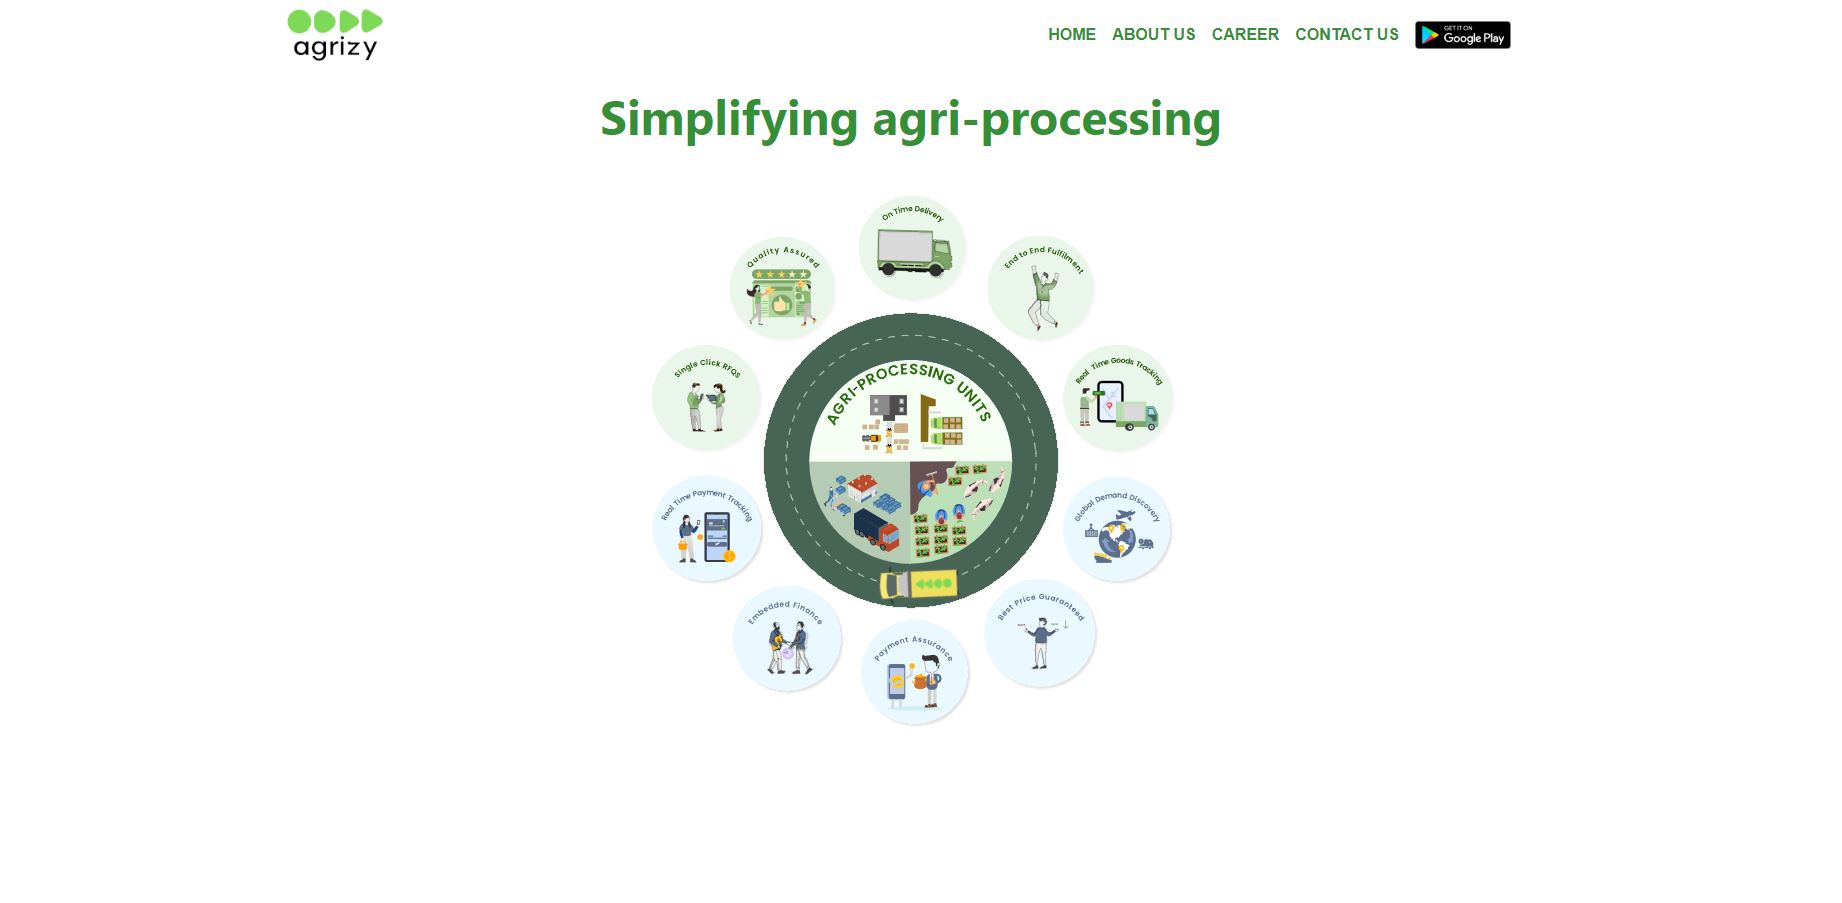 With recent funding of $5M, Agrizy is the go-to marketplace for agri suppliers, processors, and buyers